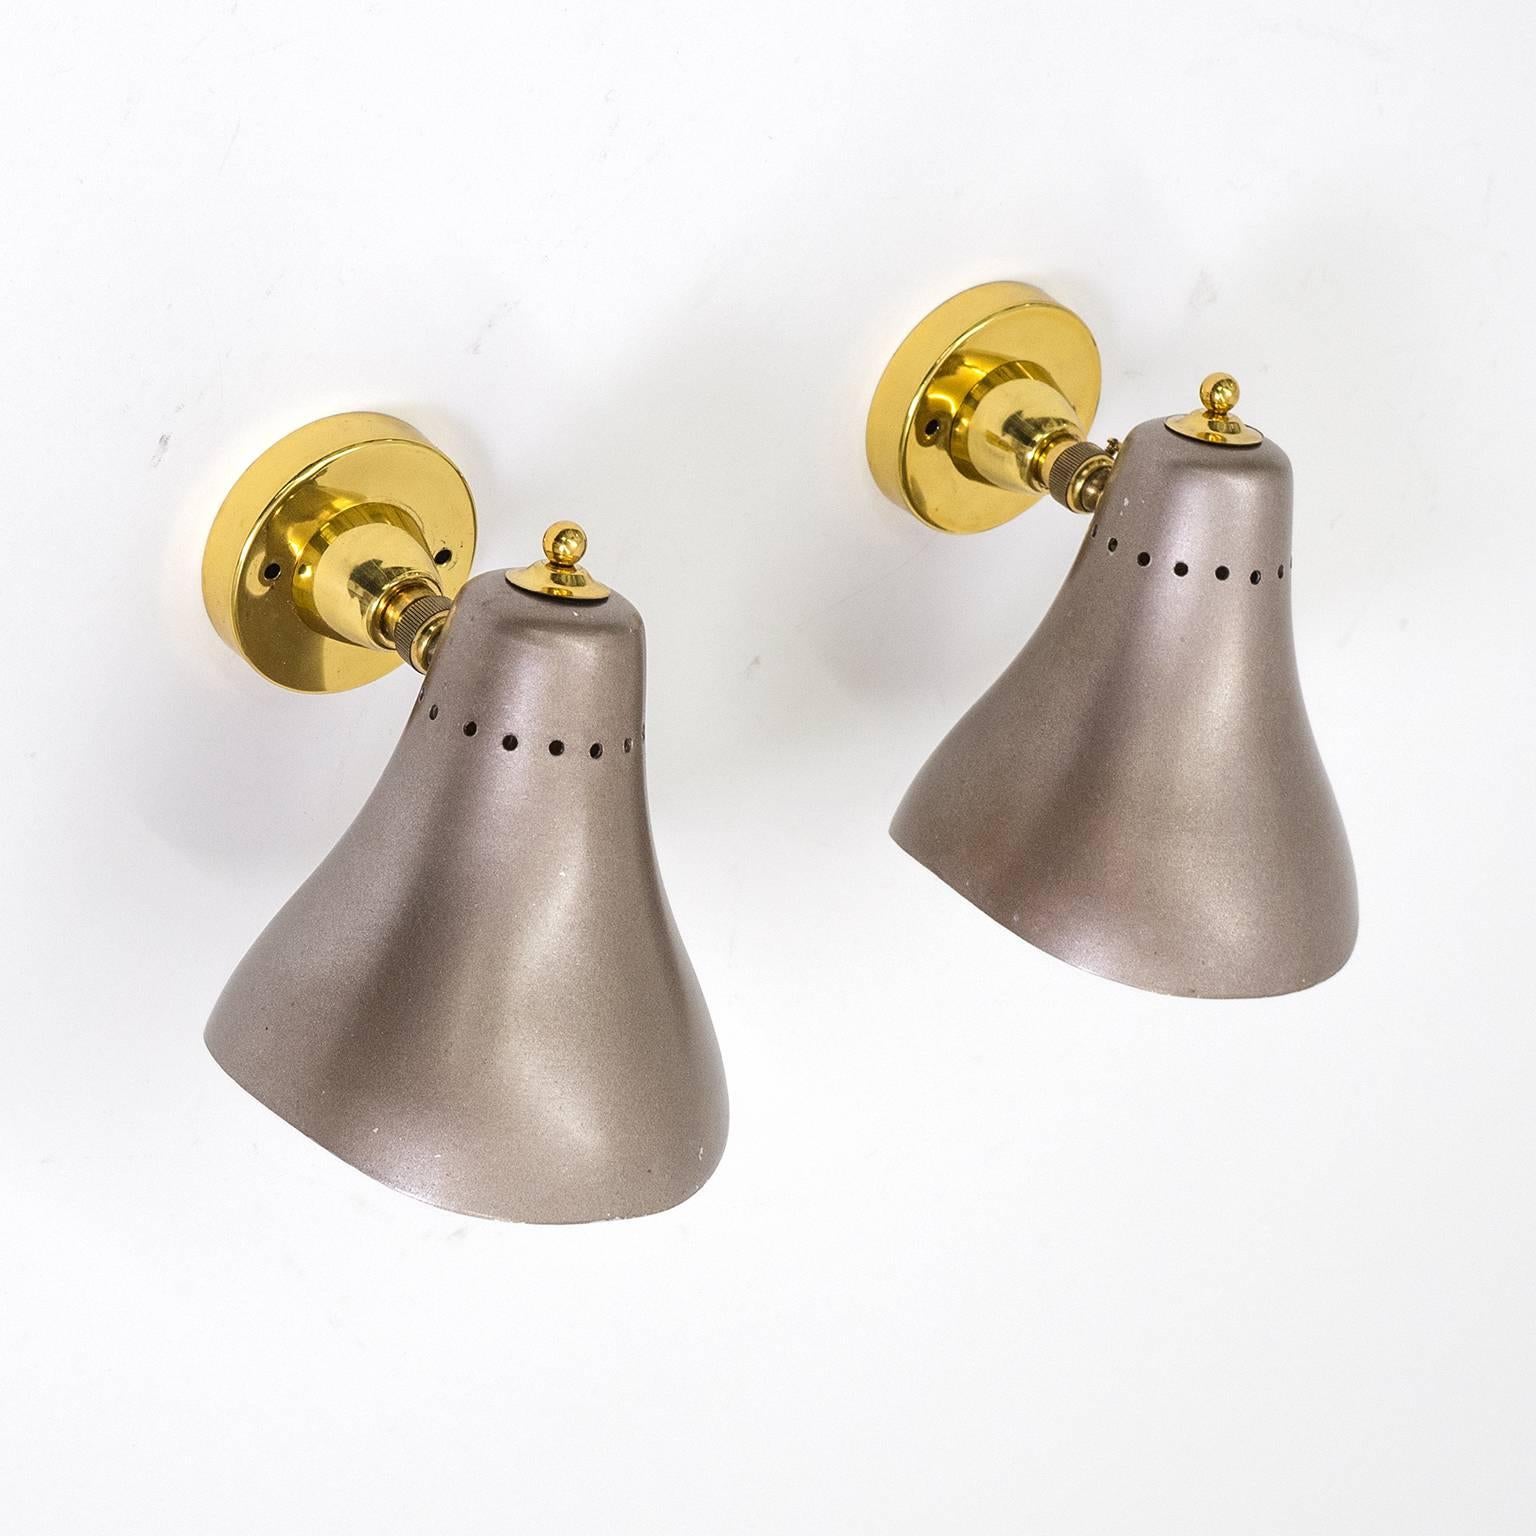 Charming pair of authentic Italian mid-century sconces. The curved aluminium cones are lacquered in an unusual metallic aubergine colour. Nice vintage condition with some minor loss of paint. Each sconce has one original brass and ceramic E27 socket